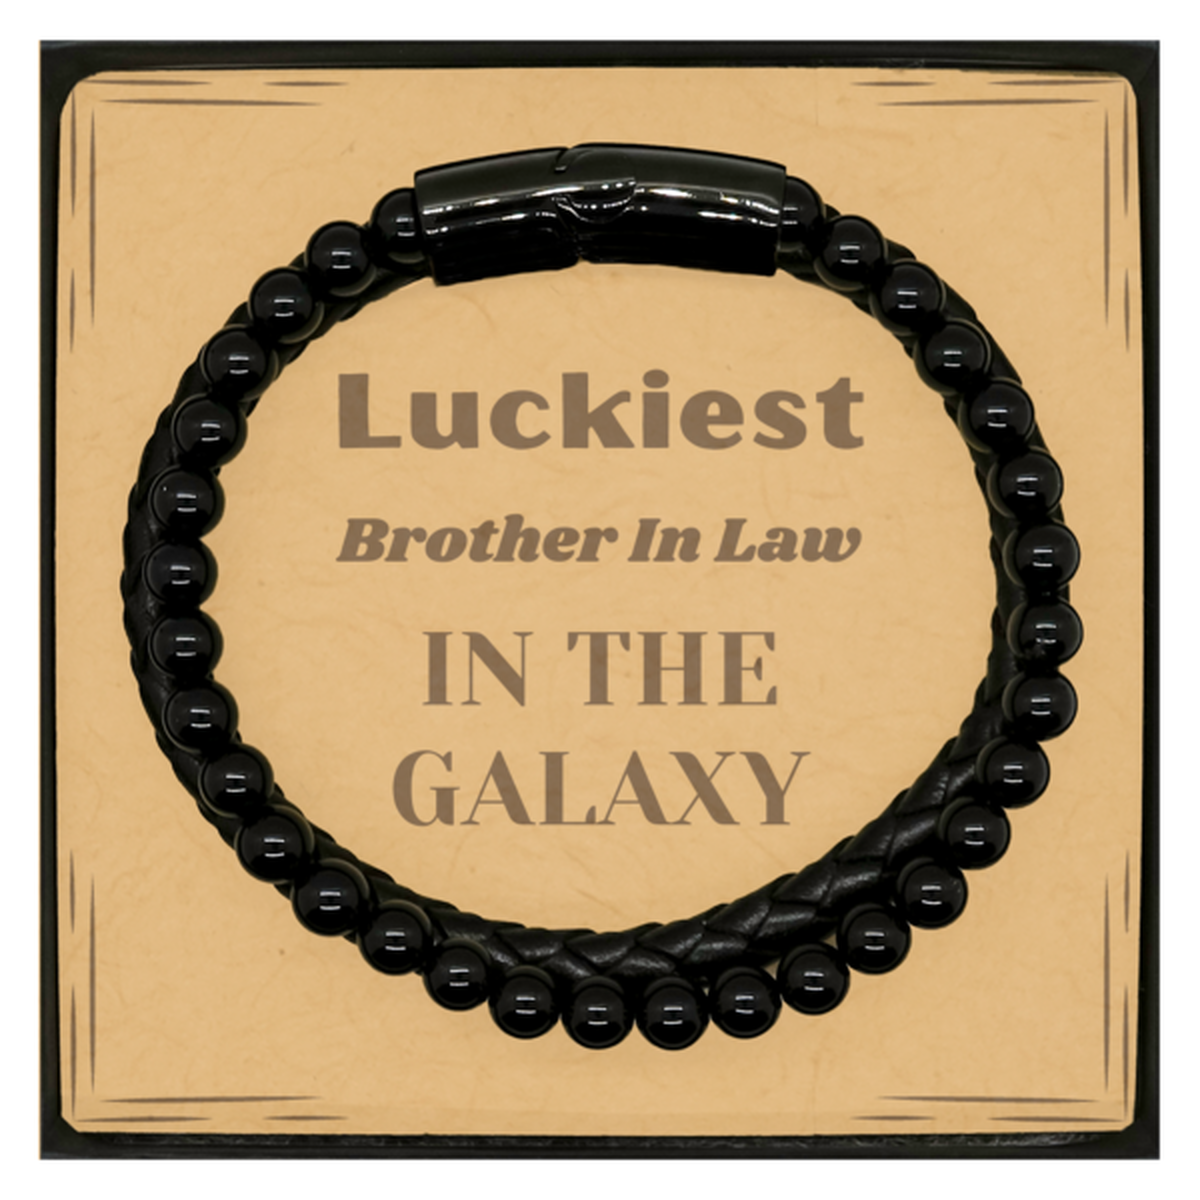 Luckiest Brother In Law in the Galaxy, To My Brother In Law Message Card Gifts, Christmas Brother In Law Stone Leather Bracelets Gifts, X-mas Birthday Unique Gifts For Brother In Law Men Women